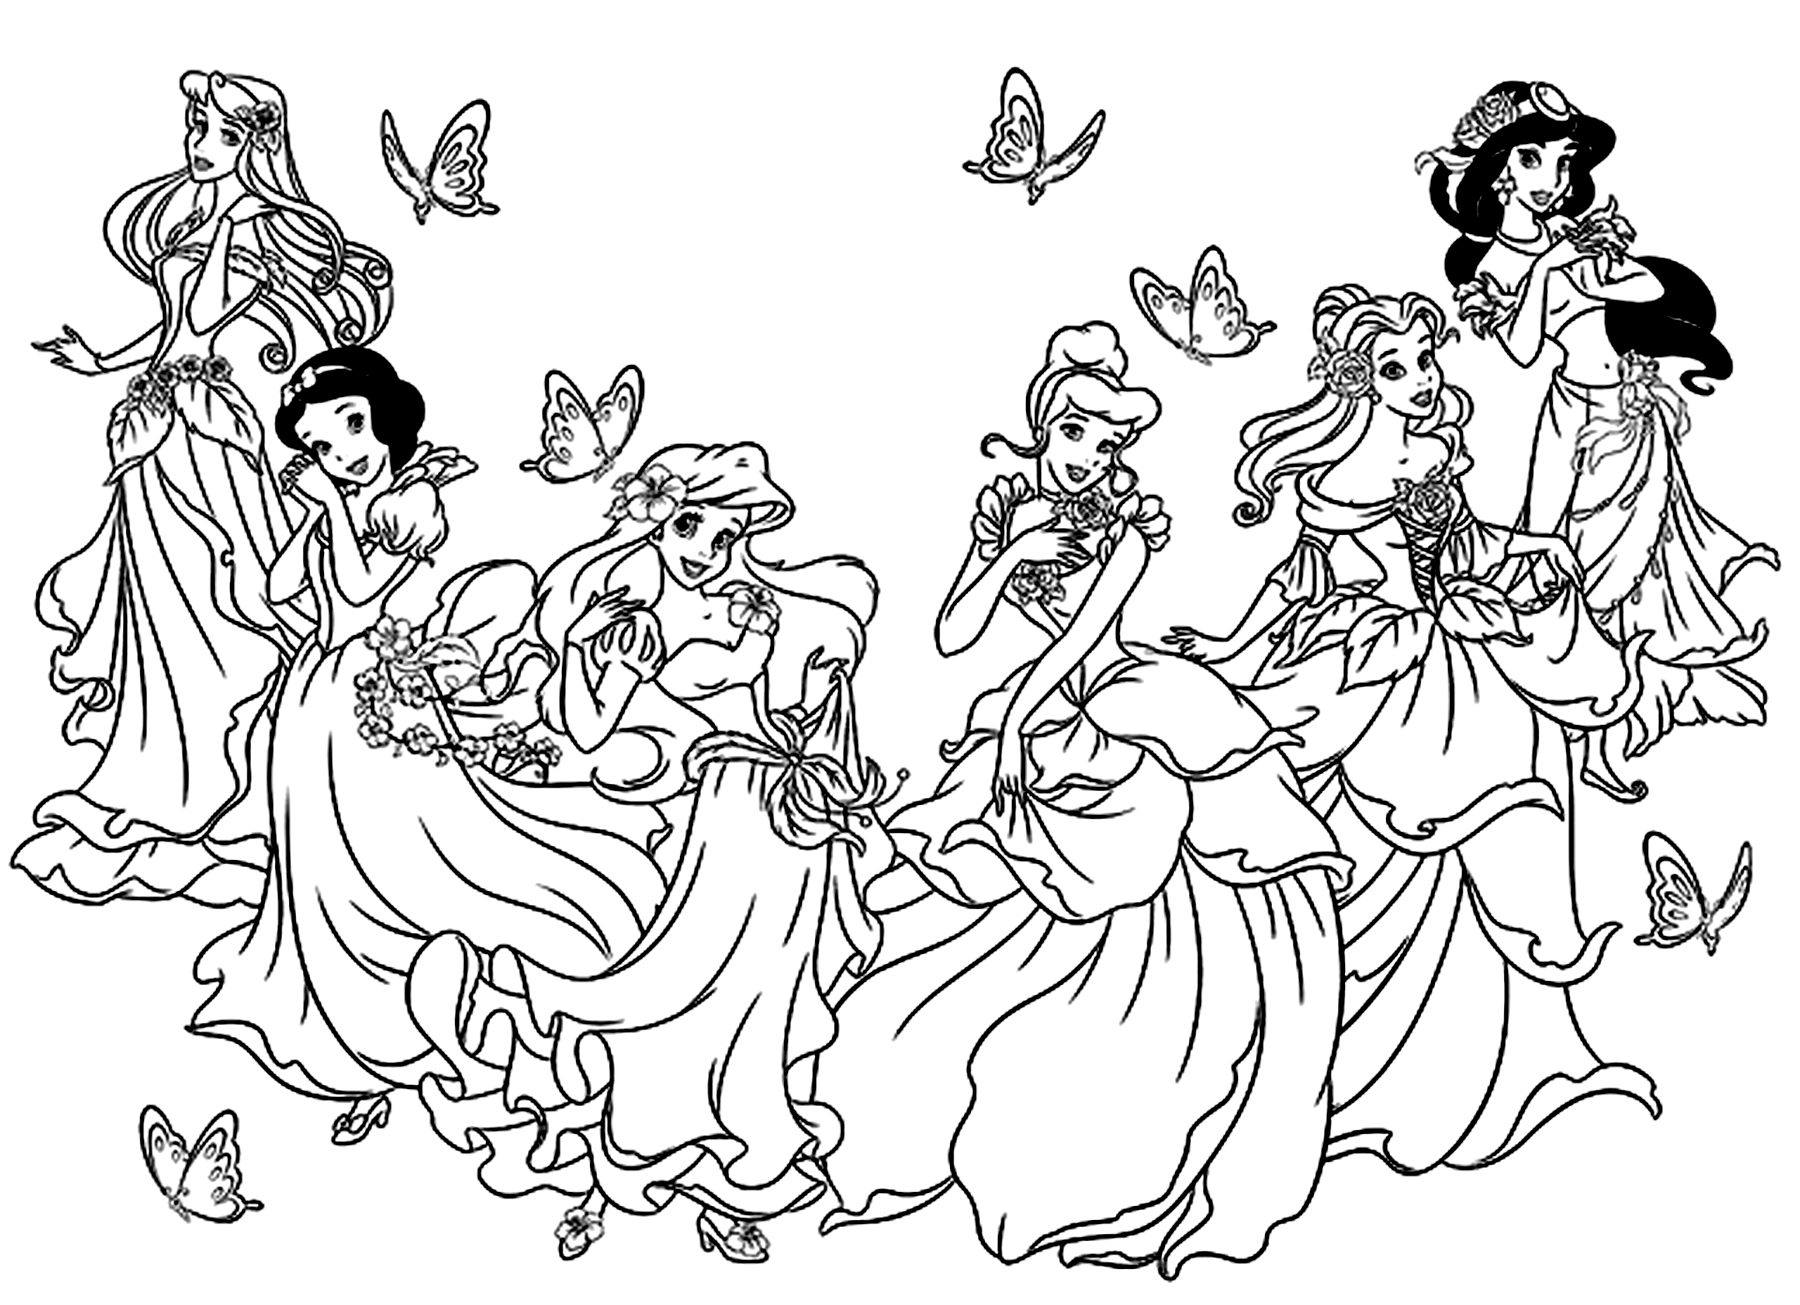 All the Disney Princesses in one coloring page. Snow White, Cinderella, Aurora (Sleeping Beauty), Ariel (The Little Mermaid), Belle (Beauty and the Beast) , Jasmine (Aladdin).These princesses are not in this drawing : Pocahontas and Mulan.